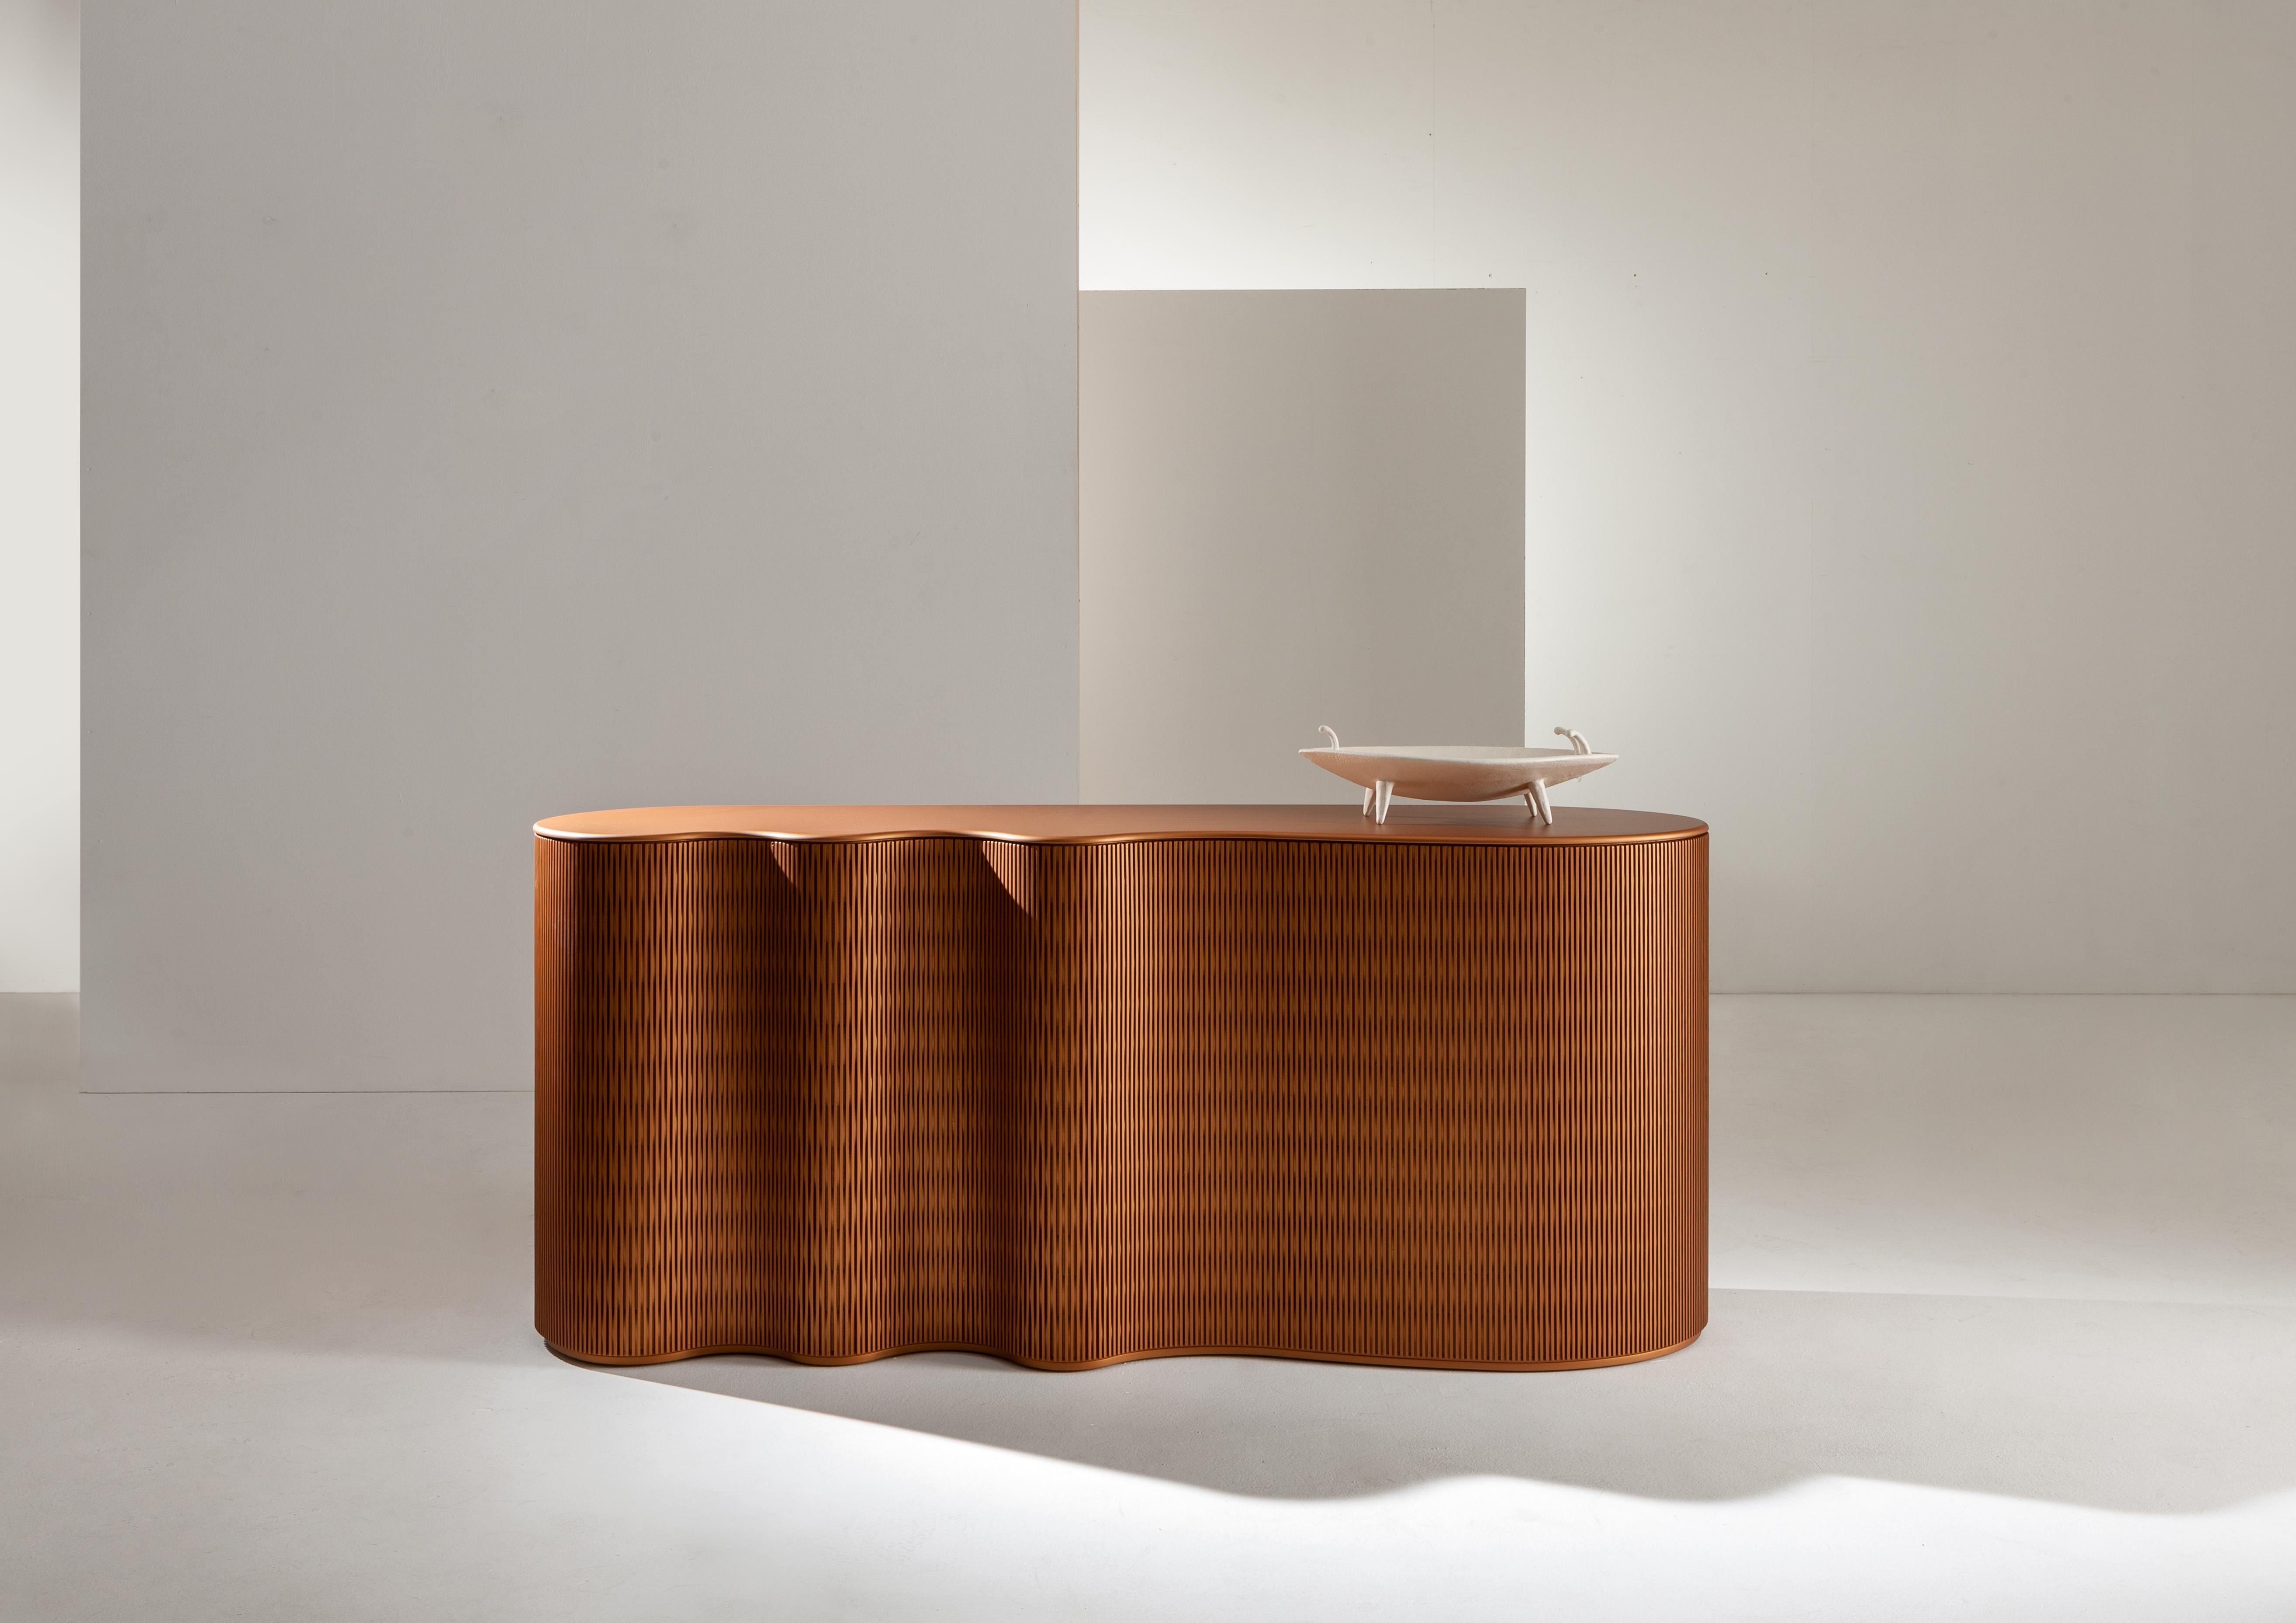 Console in varnished Lacca 61 Ocra wood, featuring a curved base in perforated wood with Lacca 61 Ocra varnish and a smooth top.

Finish:
Lacca 61 Ocra.

Part of the Infinity collection, this console revisits the unique detail of the geometric